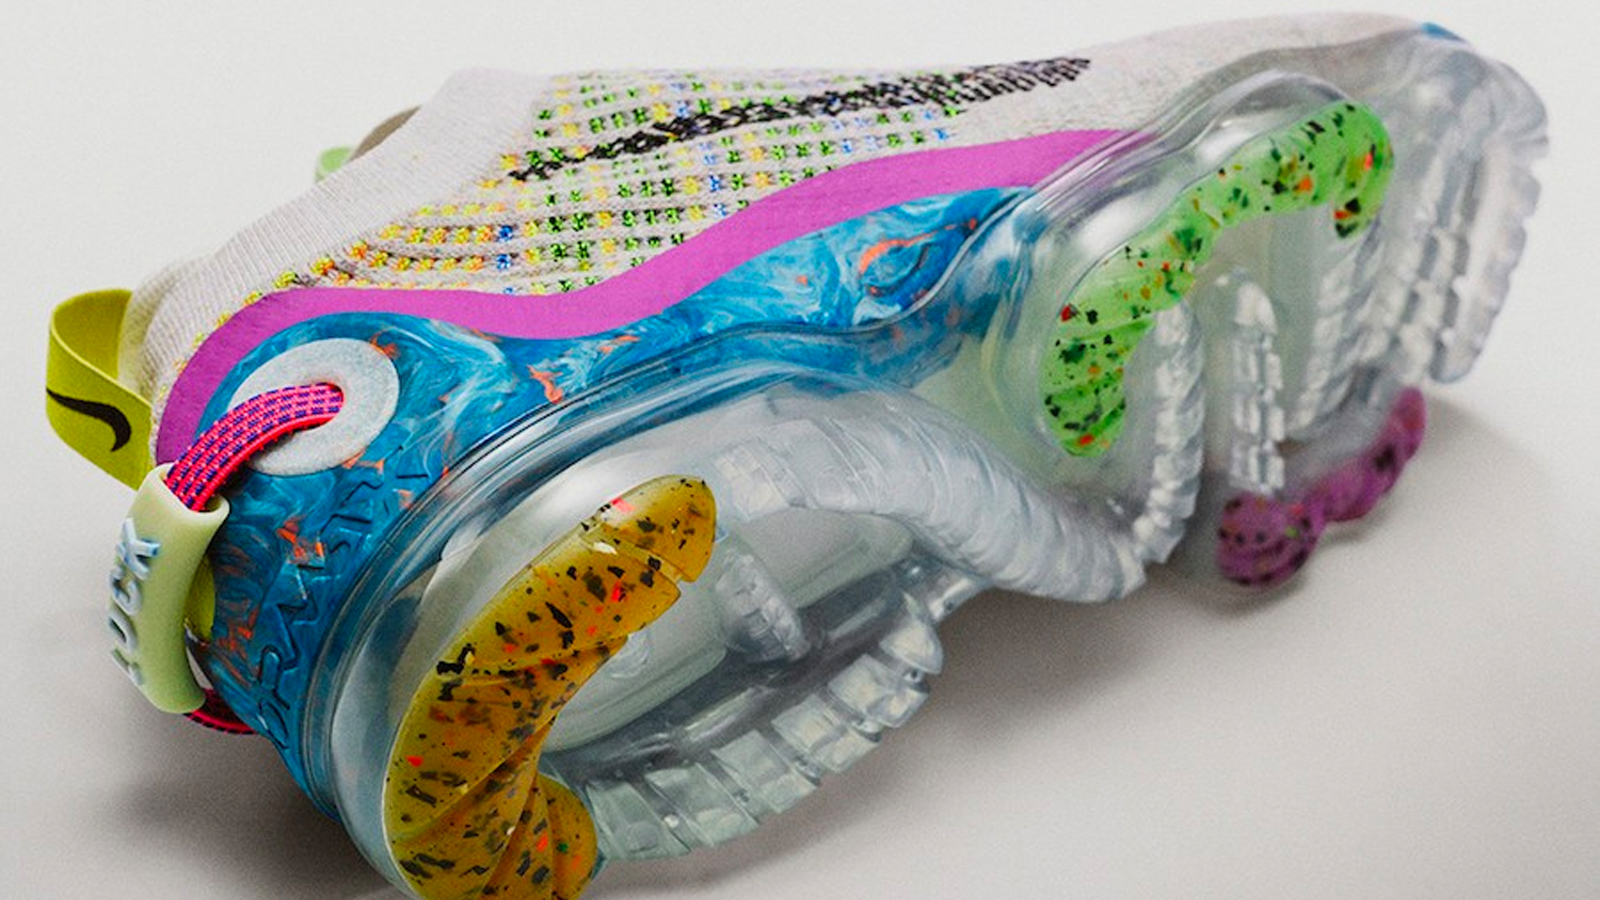 what are vapormax made for